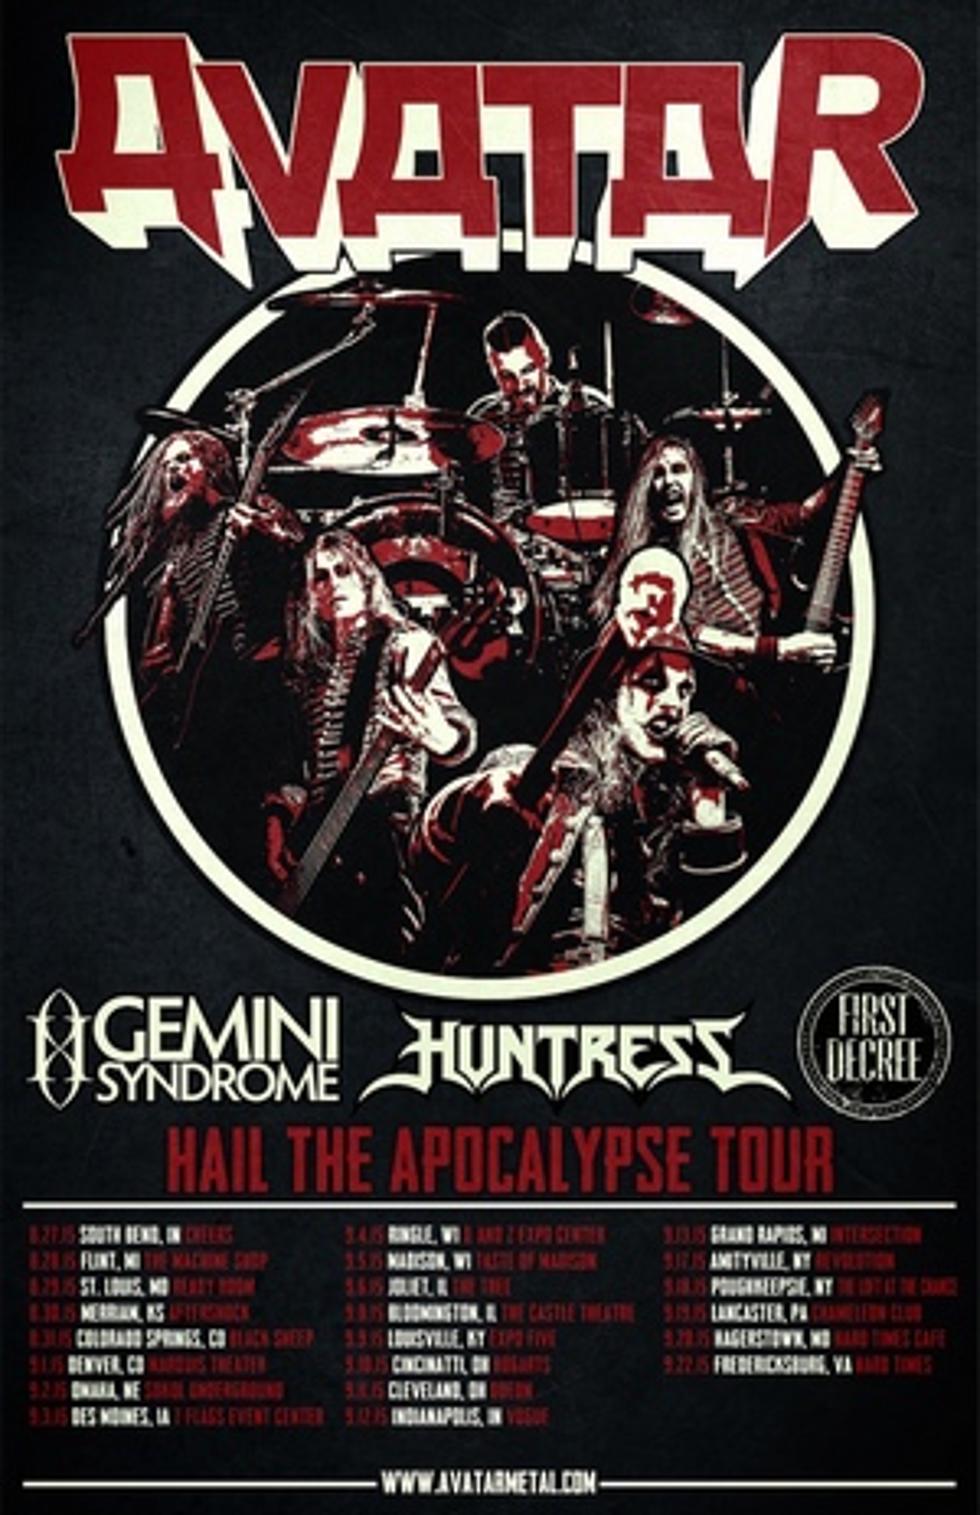 Avatar Announce U.S. Tour With Huntress, Gemini Syndrome and First Decree